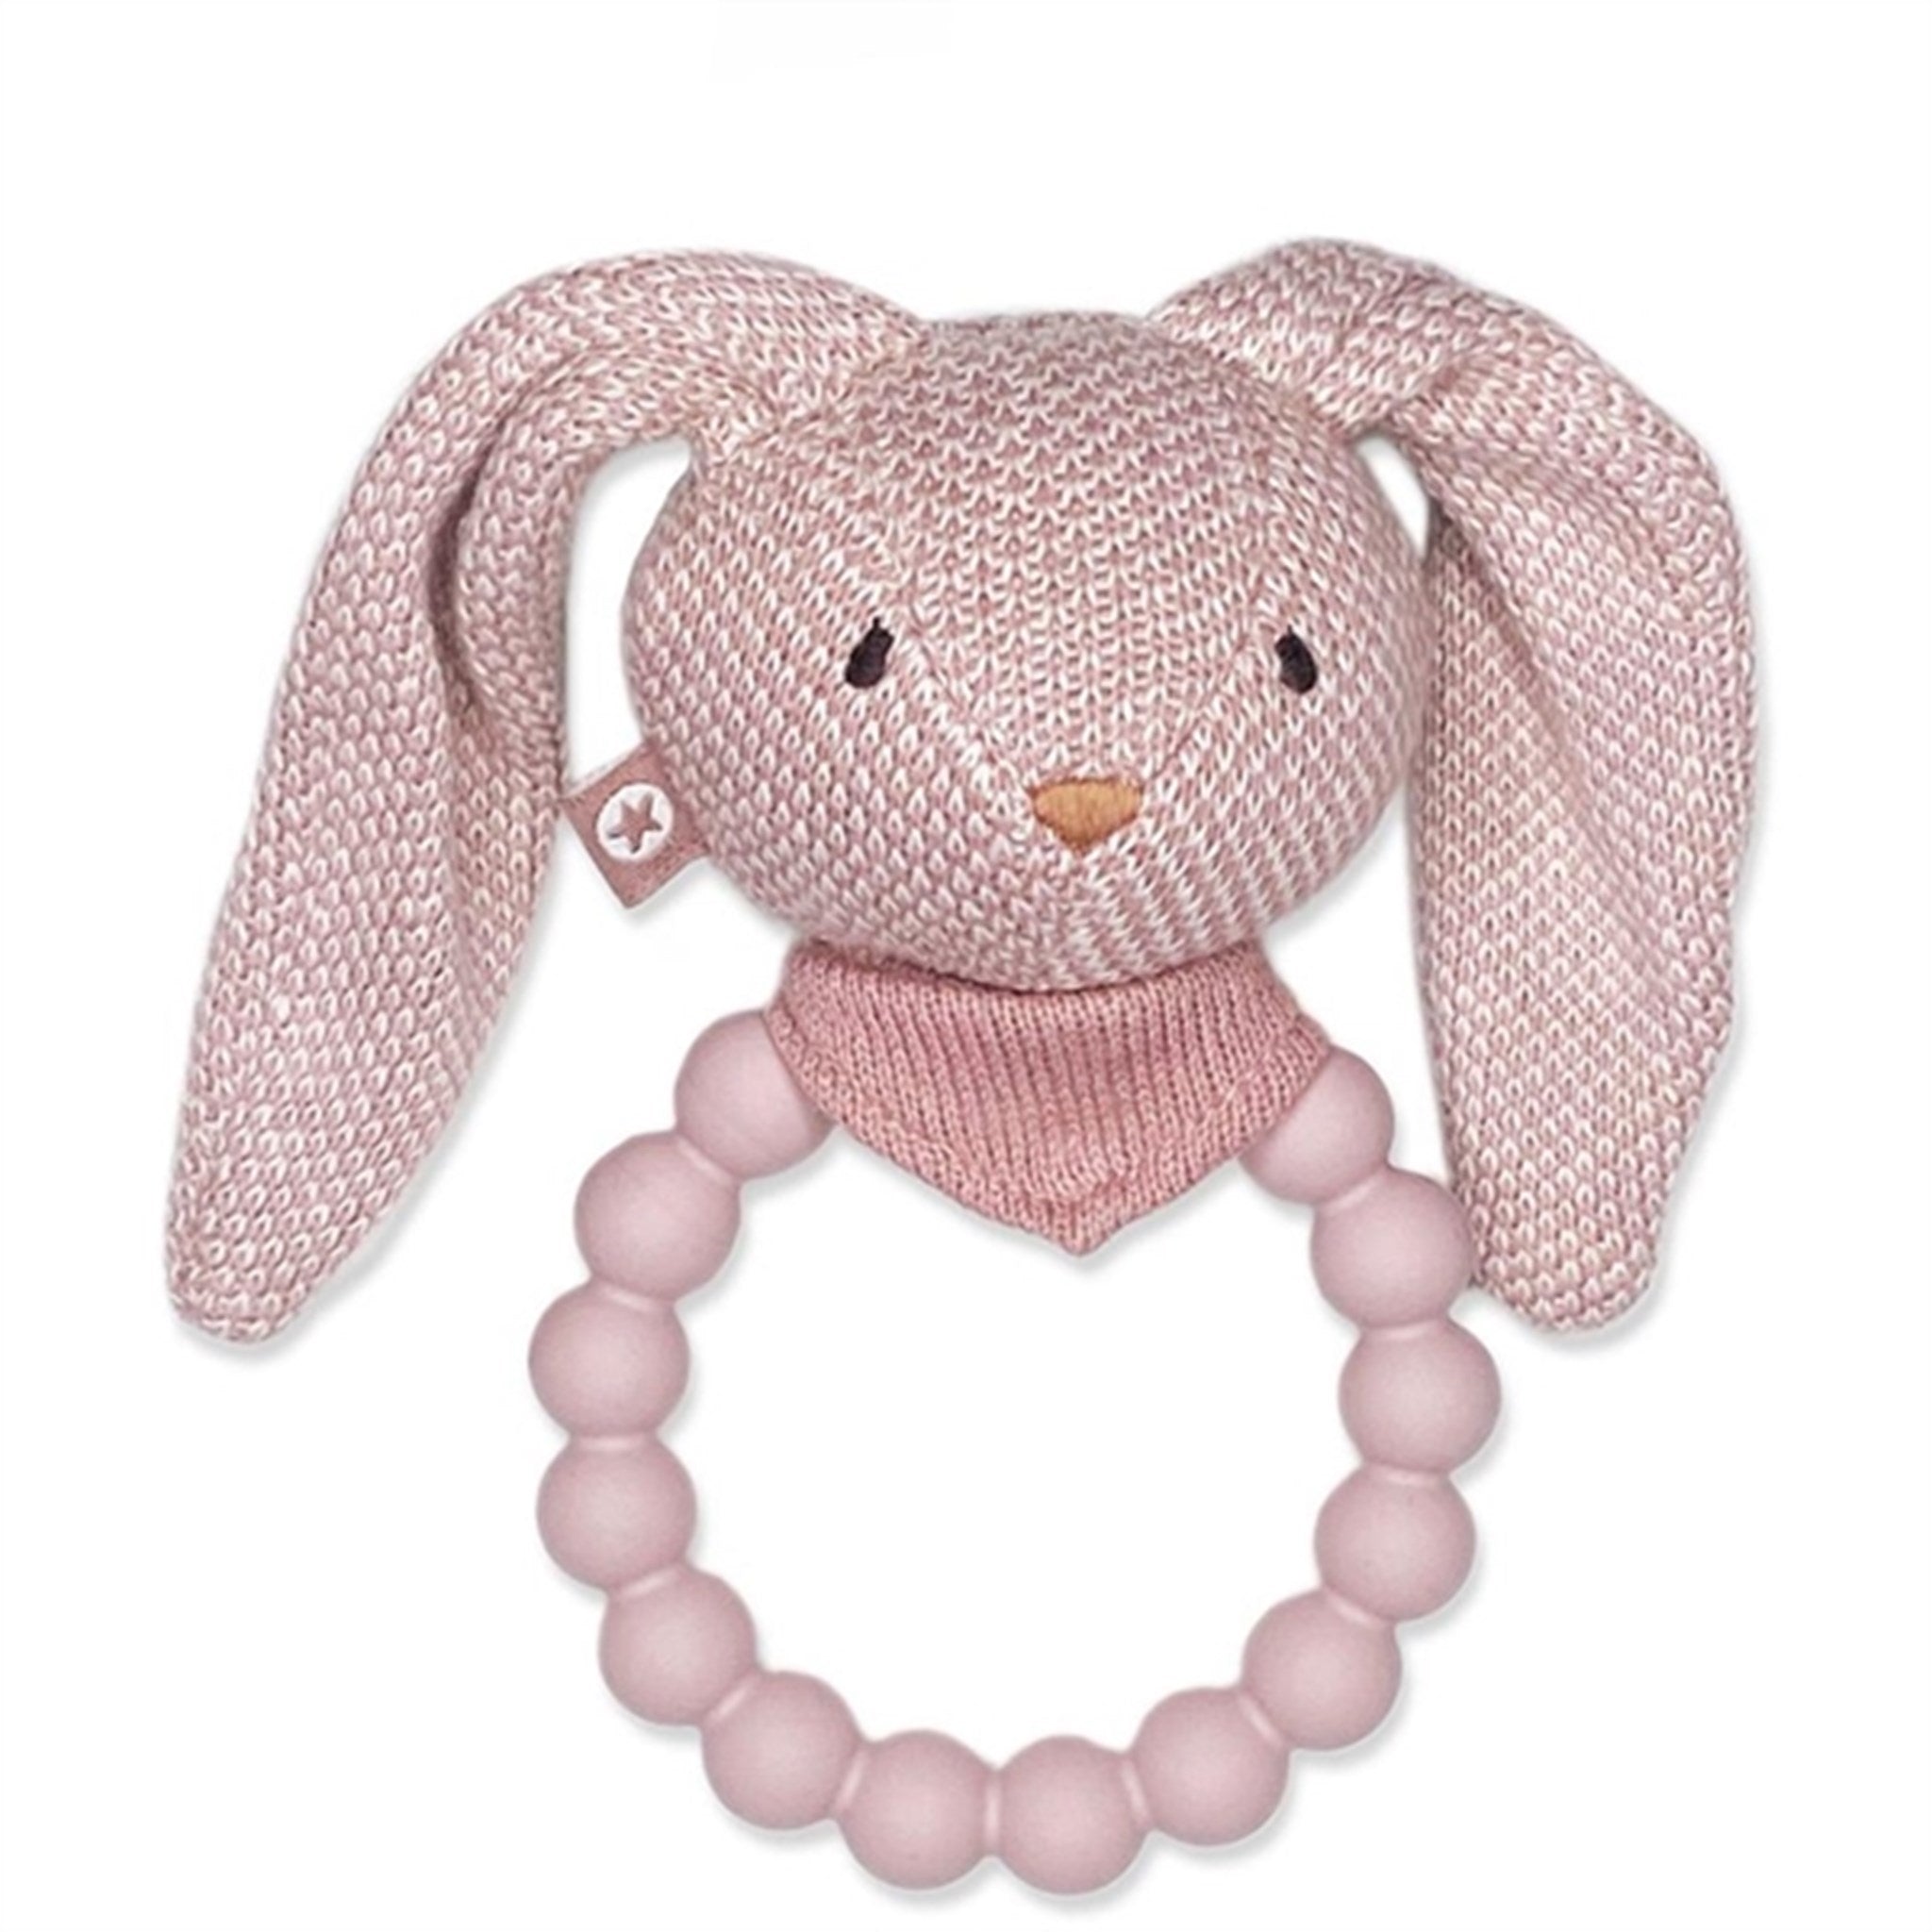 Smallstuff Knitted Rattle with Silicone Ring Bunny Soft Powder